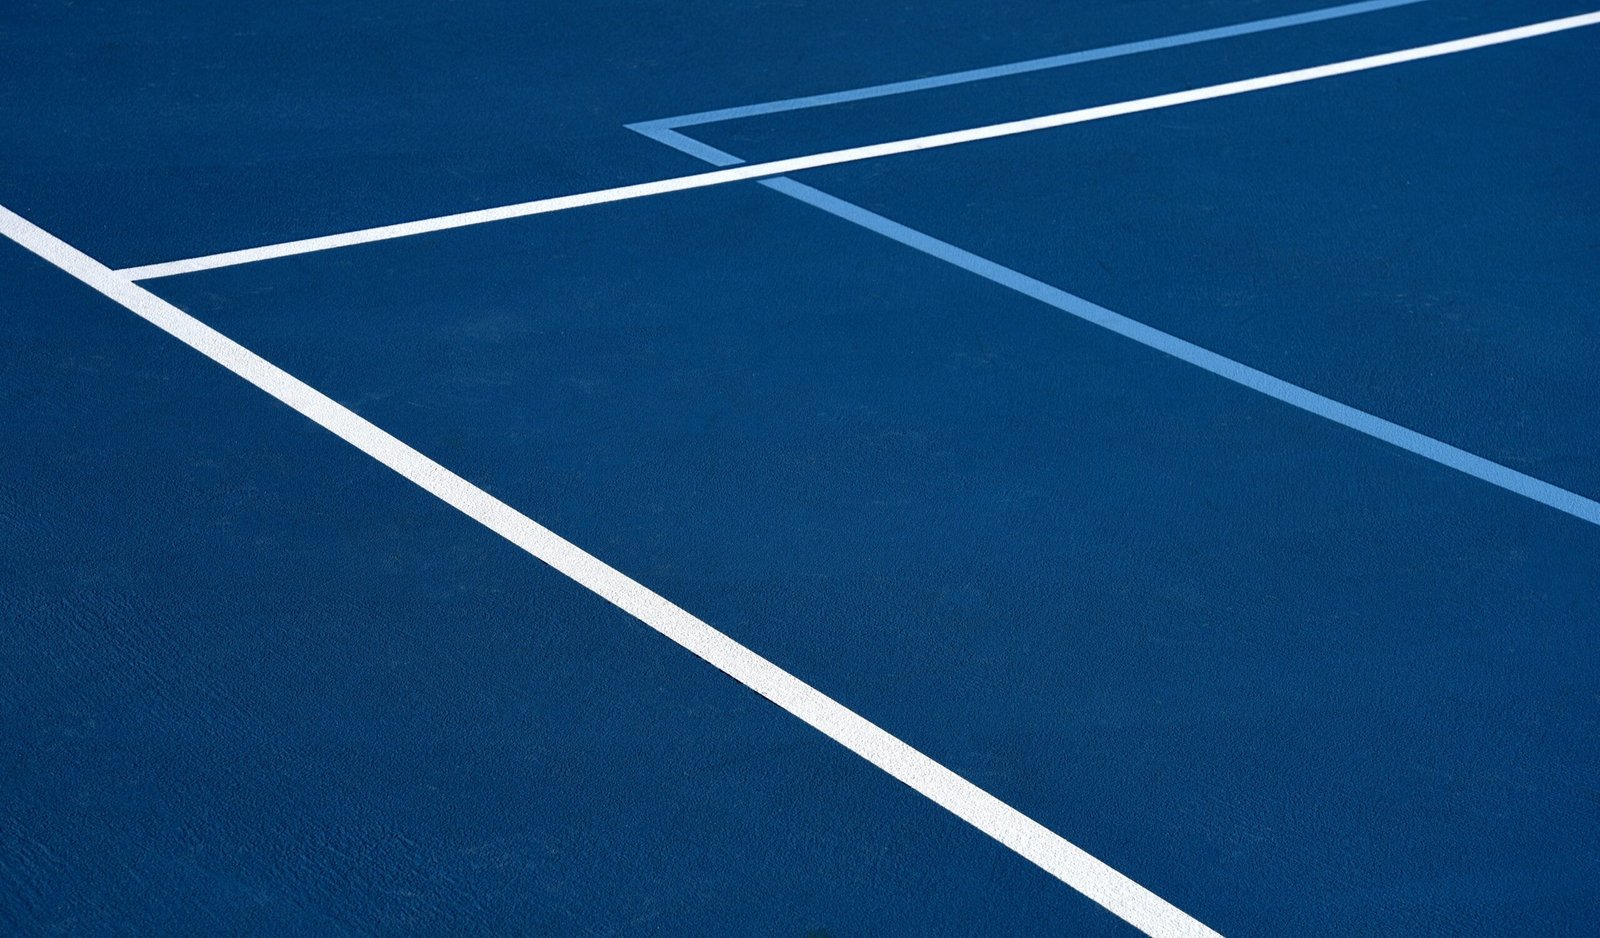 discover everything about tennis, from rules and techniques to the latest news and events in the world of tennis.